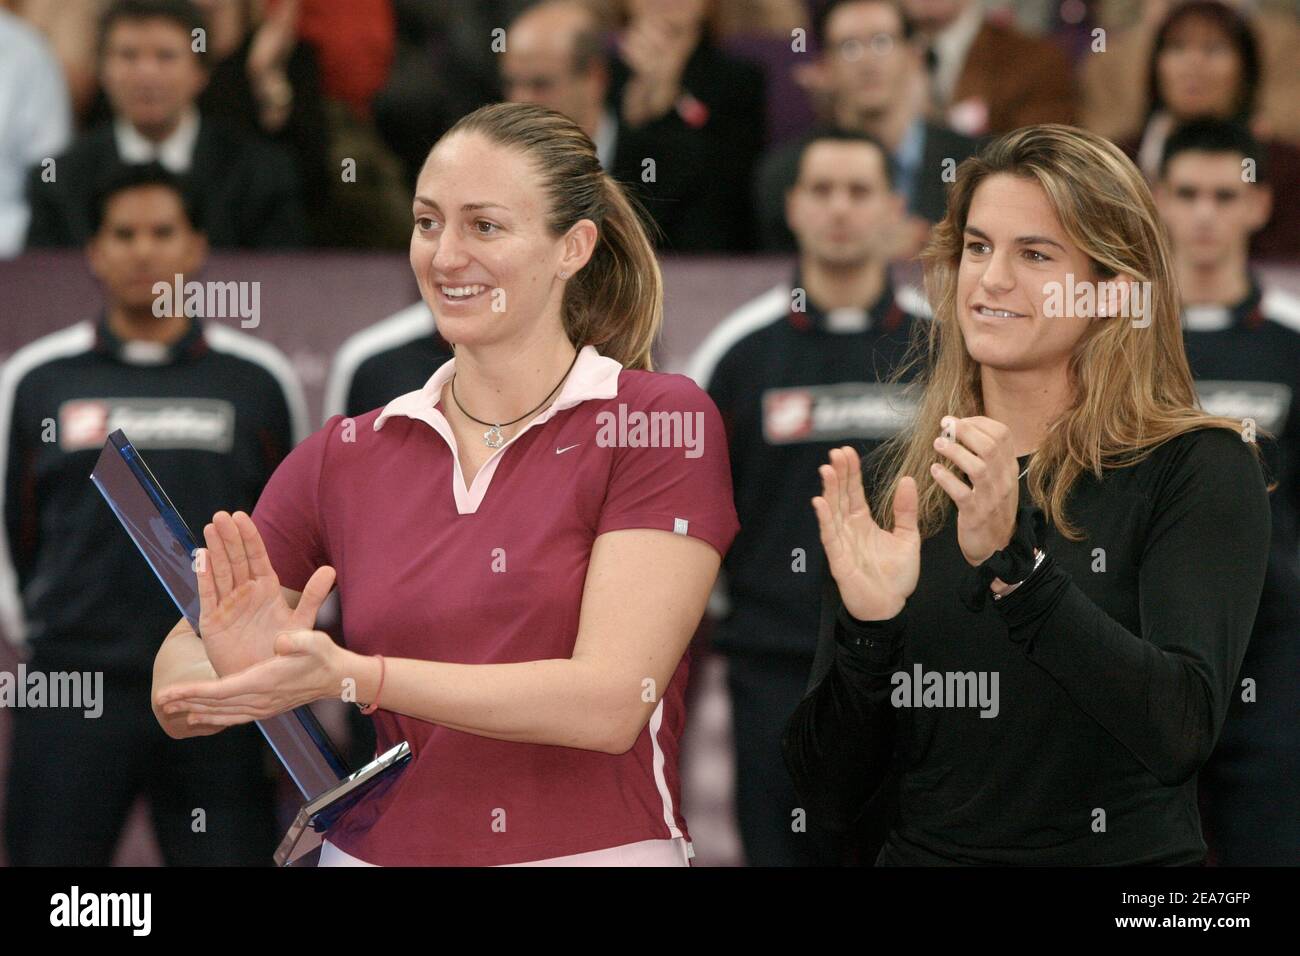 © Laurent Zabulon/ABACA. 56085-16. Paris-France, February 15, 2004. Mary Pierce of France lost against Kim Clijsters, of Belgium, during the final of the Open of Gaz de France tennis tournament in Paris Stock Photo